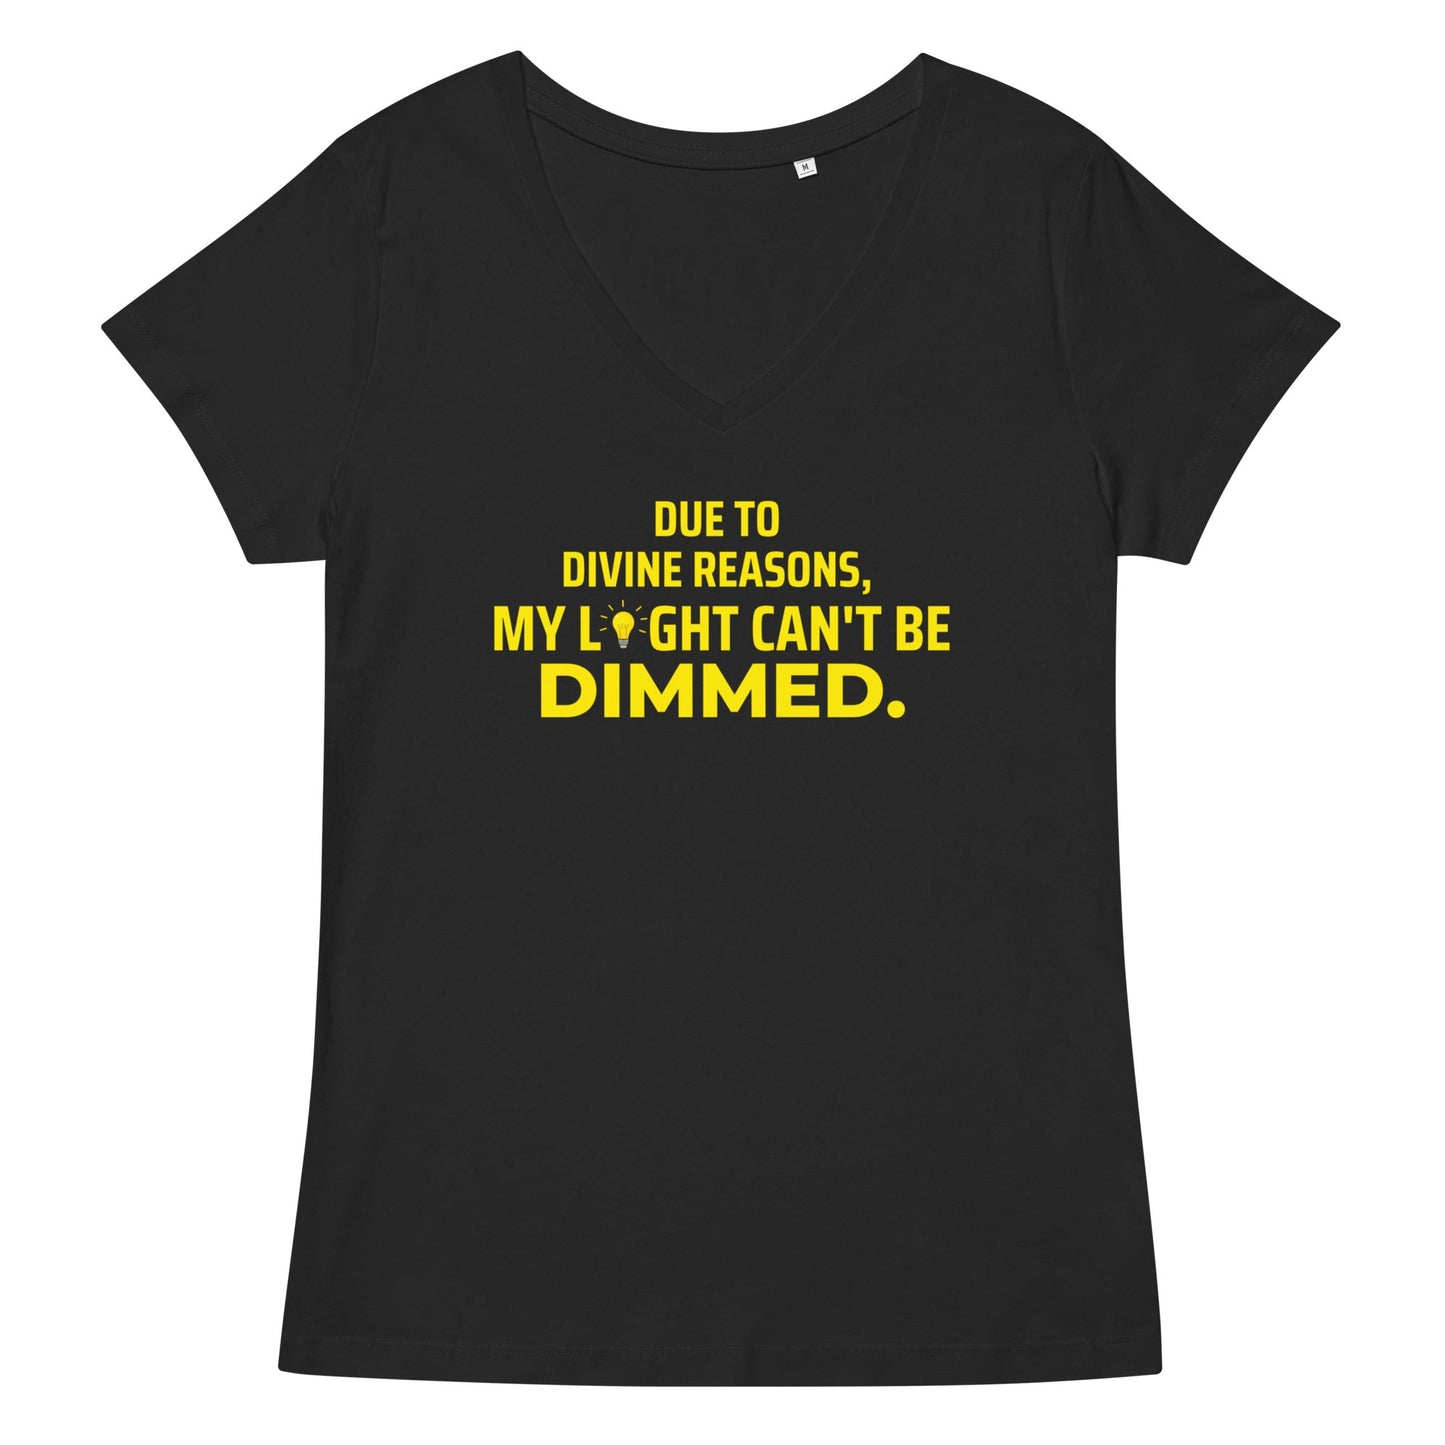 Can't Be Dimmed Women’s Fitted V-neck T-shirt - Catch This Tea Shirts